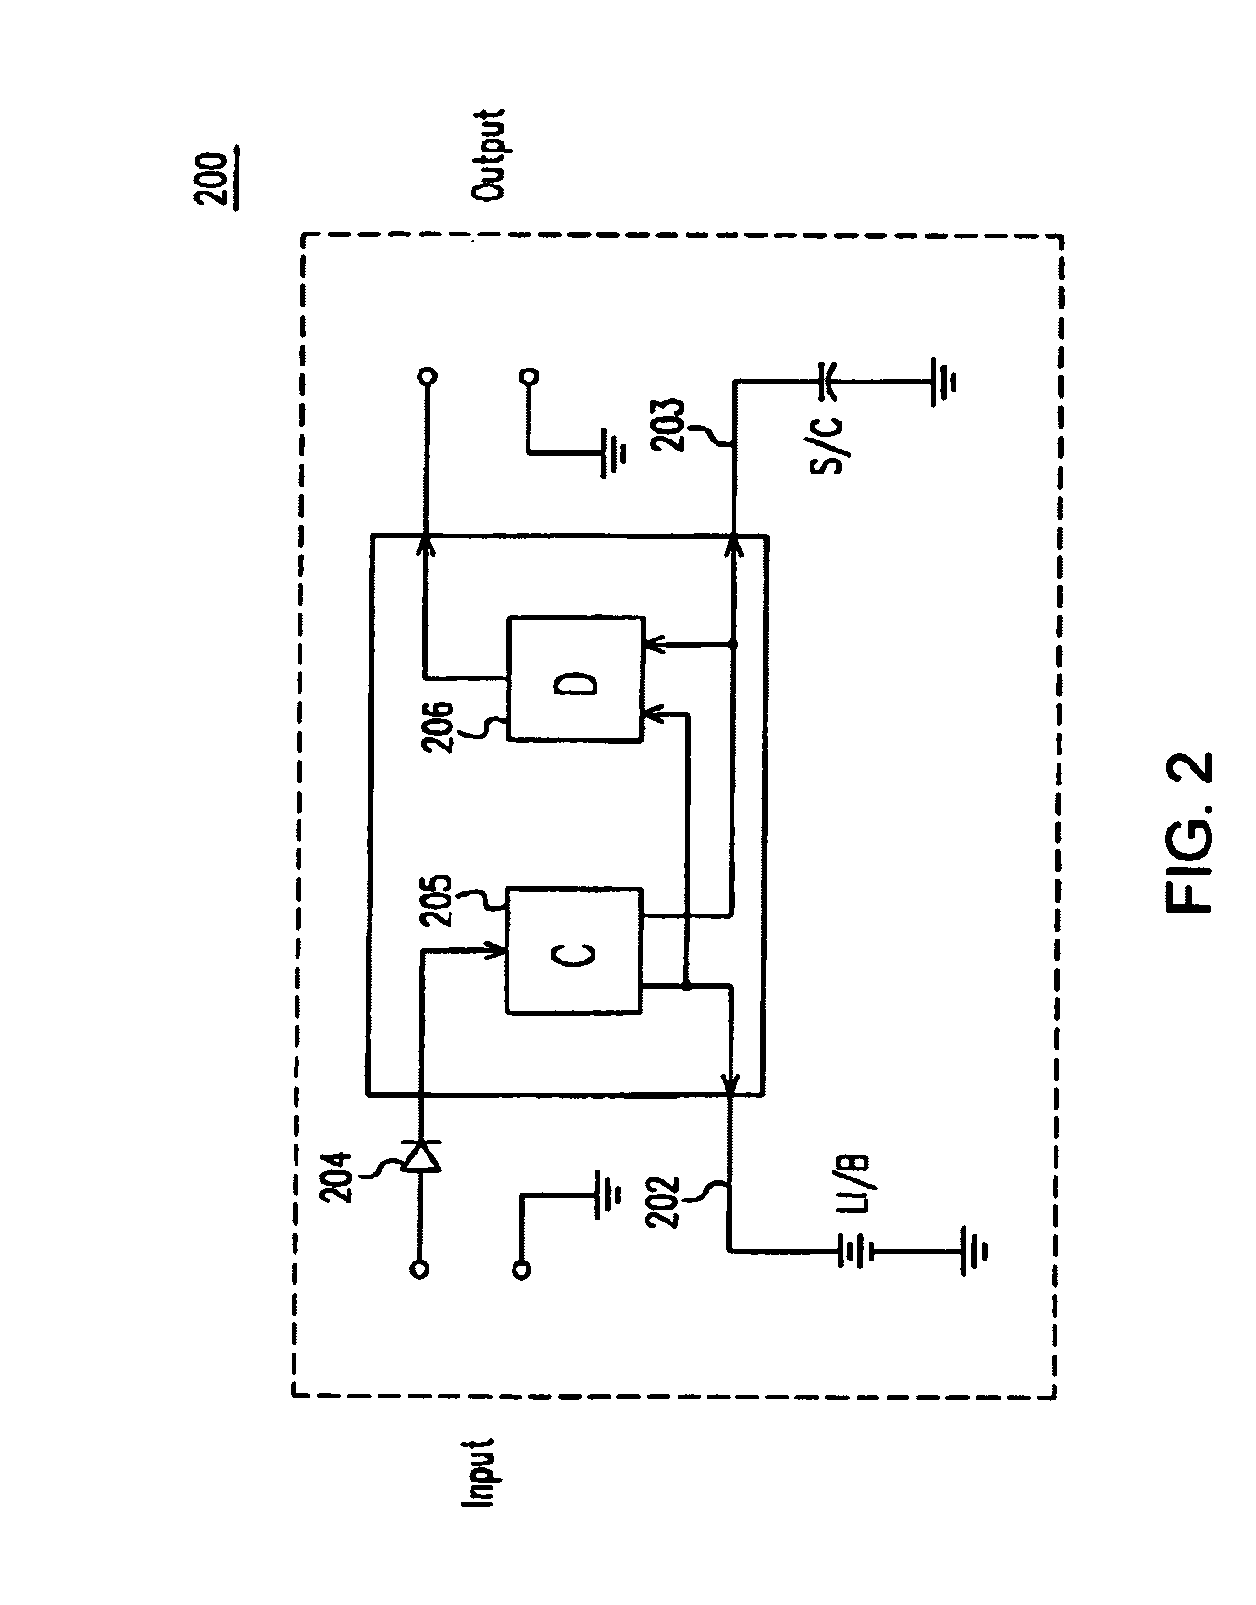 Battery with built-in load leveling